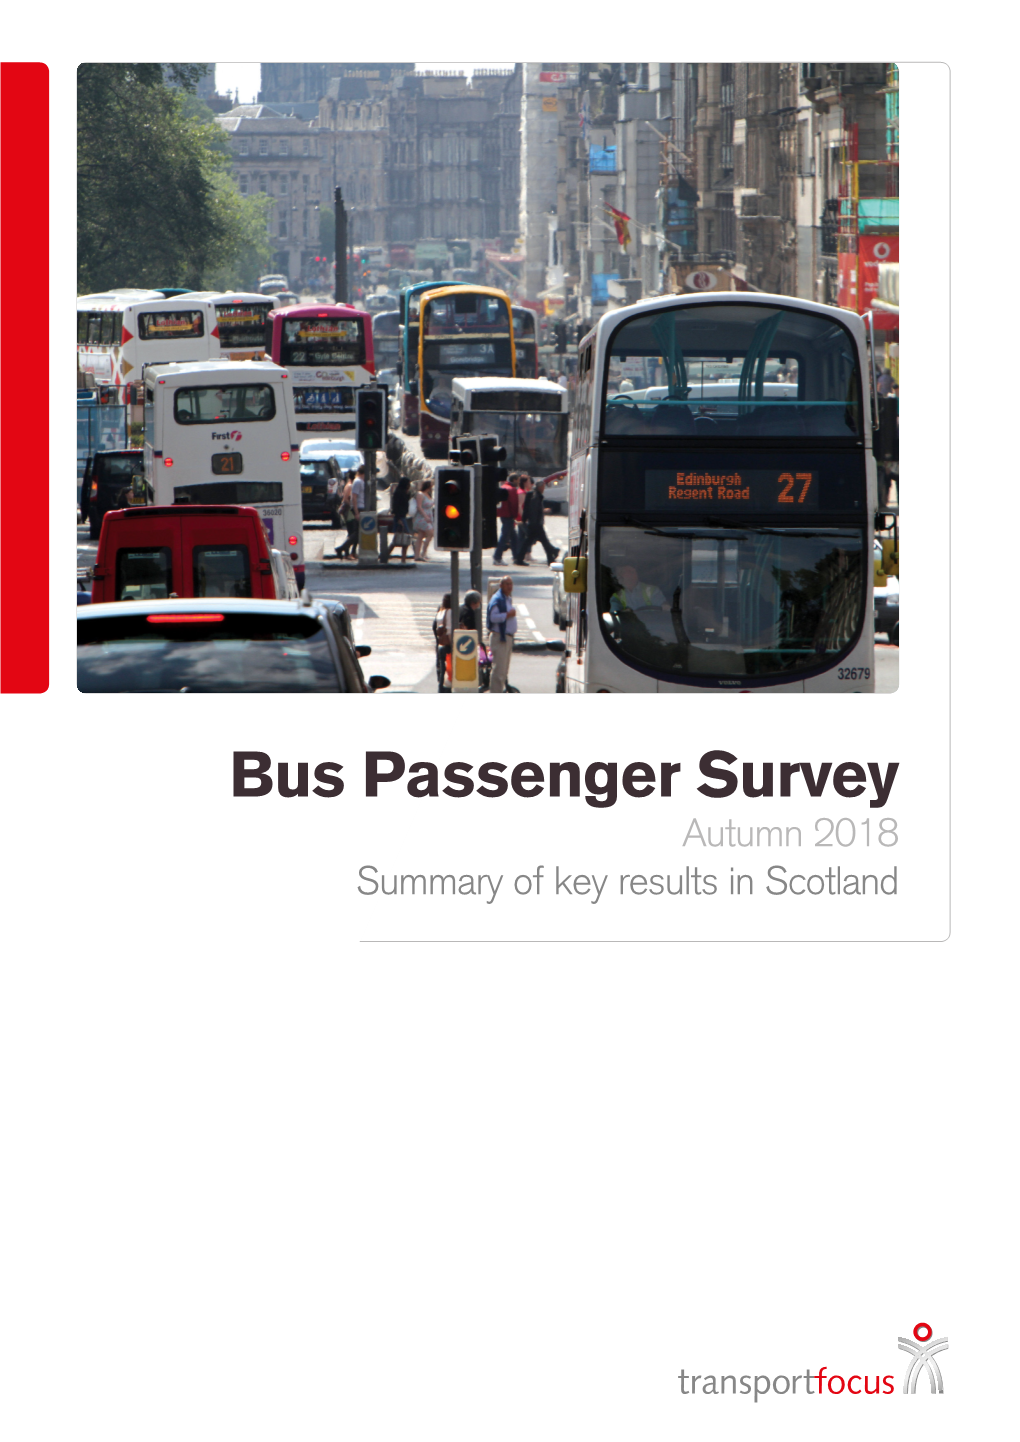 Bus Passenger Survey Autumn 2018 Summary of Key Results in Scotland Scotland Area Results Key Findings